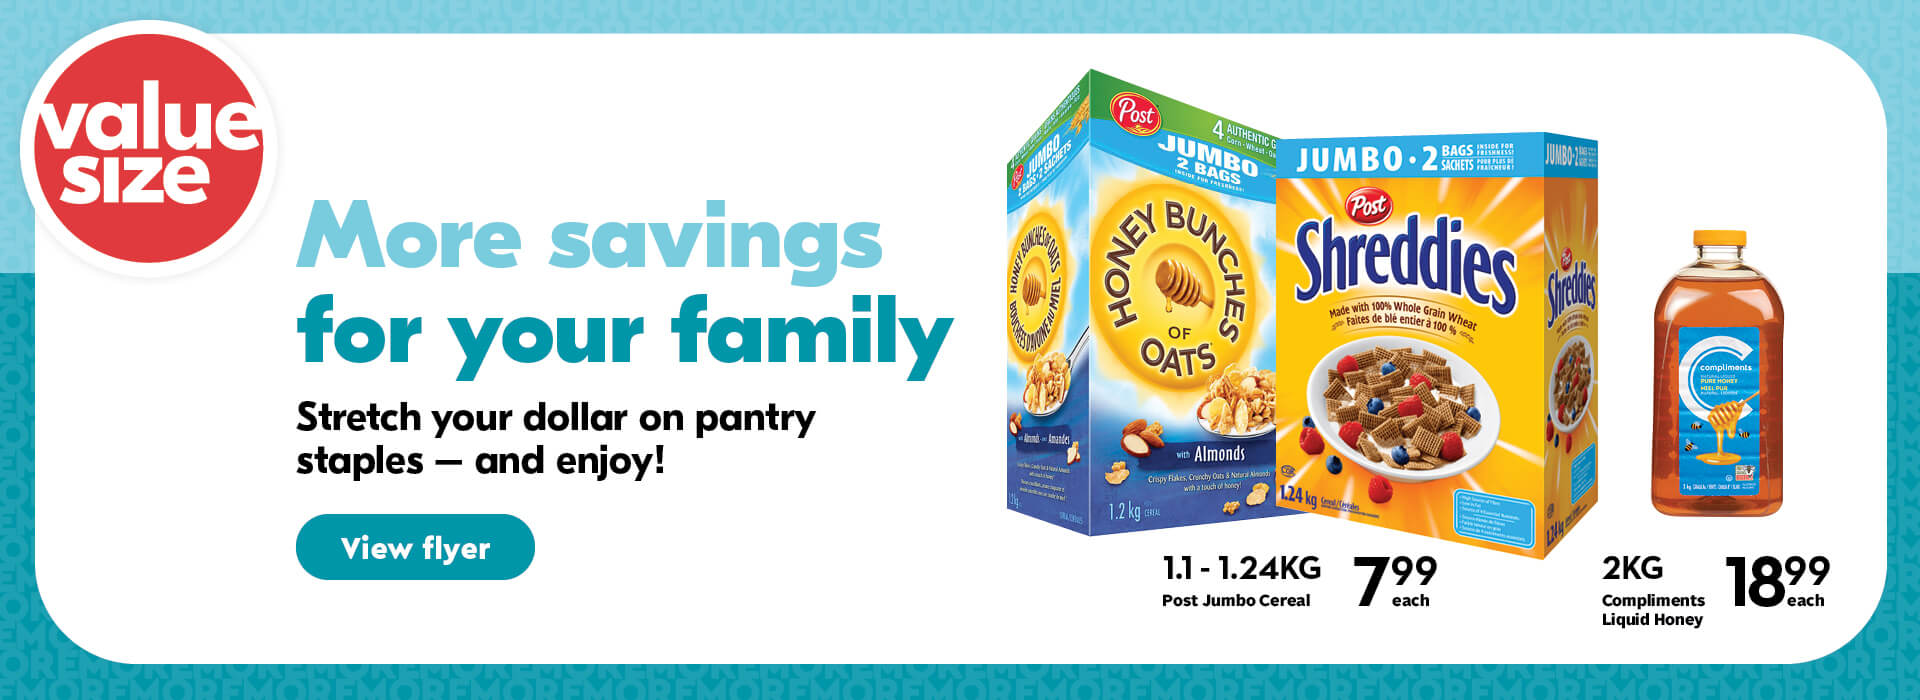 More savings for your family